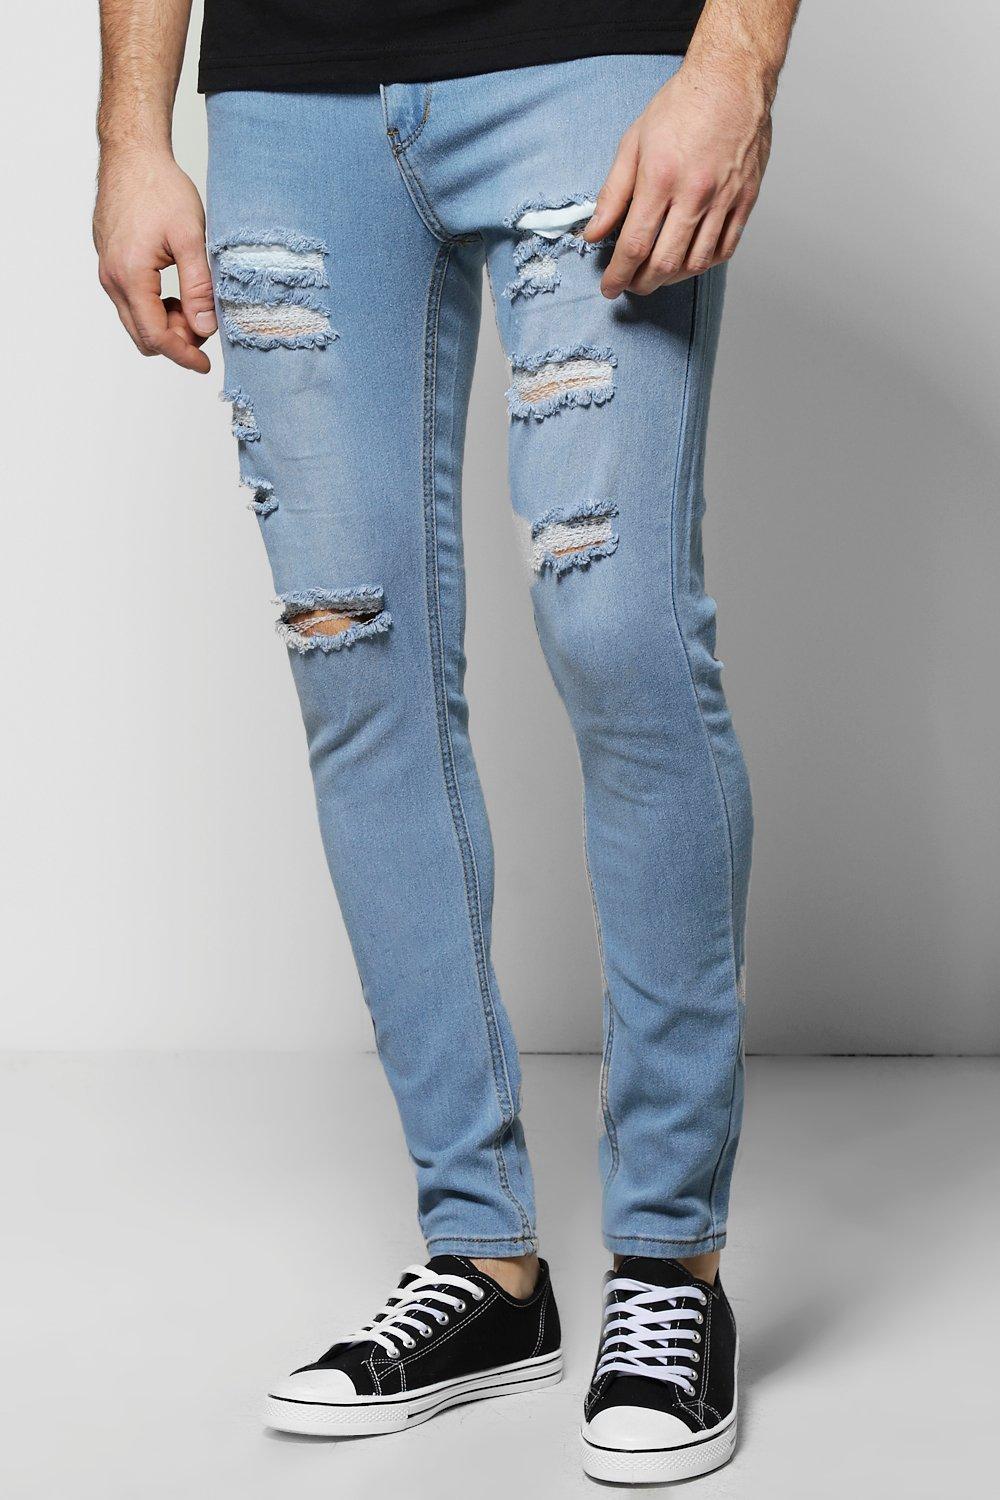 pale blue ripped jeans